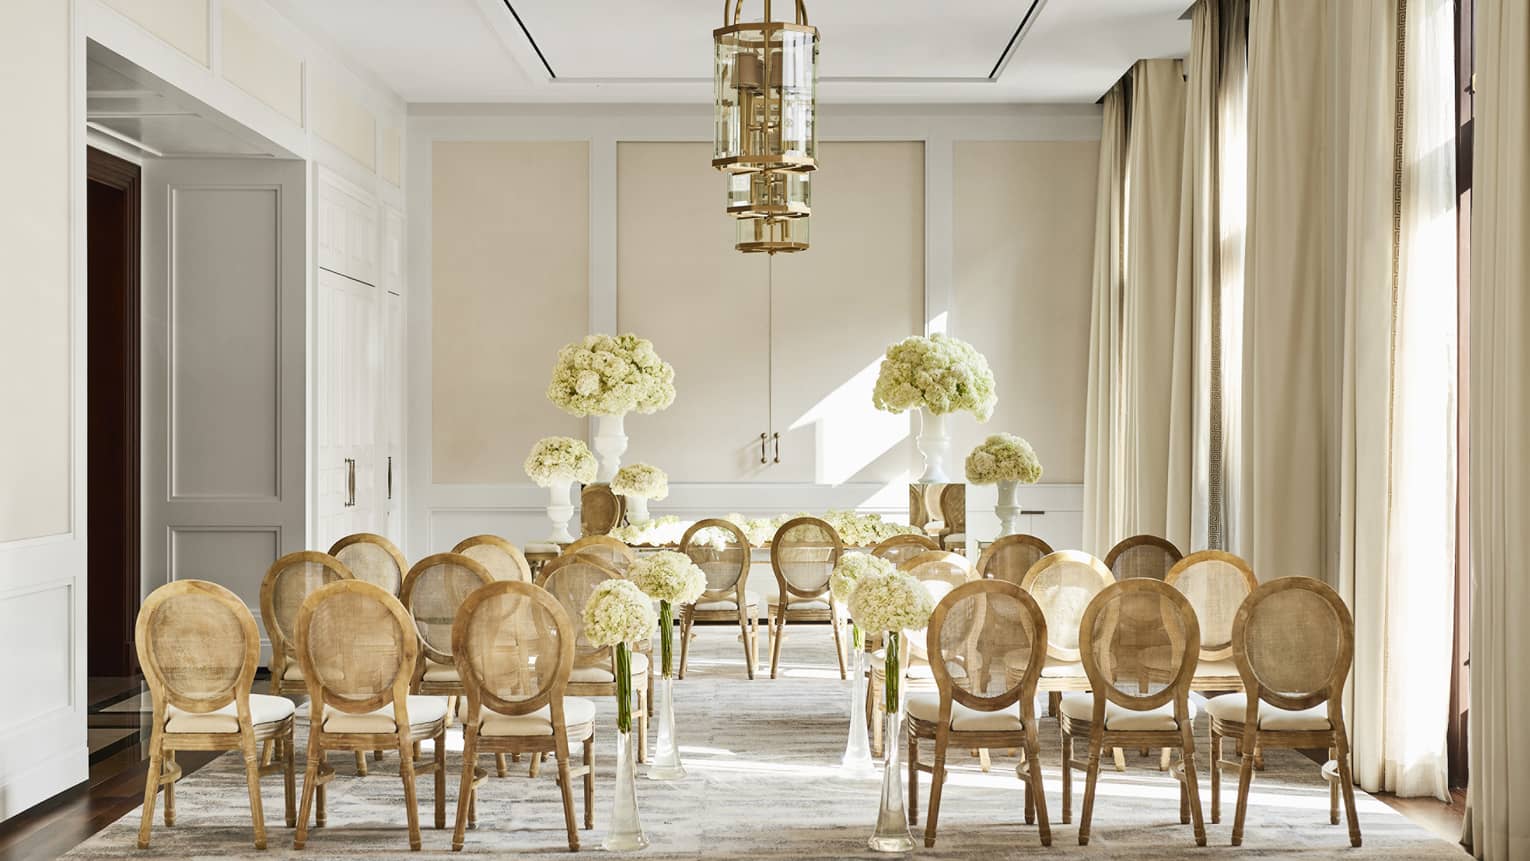 Event room with gold hanging lights, three rows of upholstered chairs set up for event